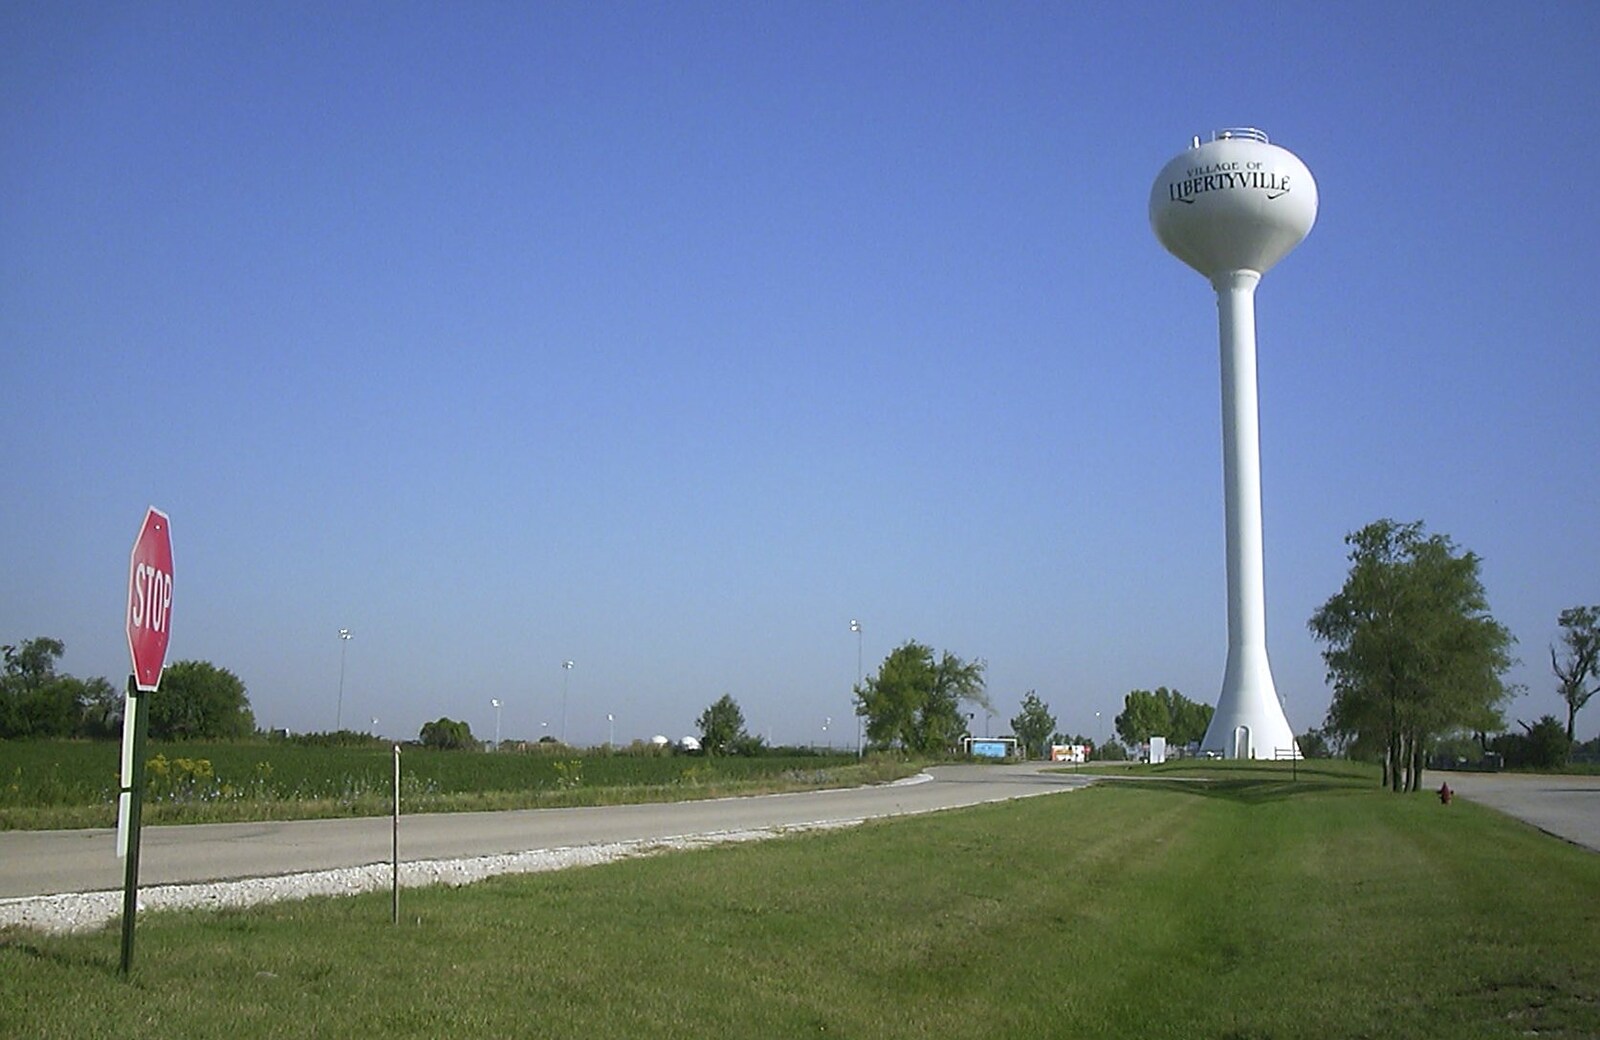 A Libertyville onion-shaped water tower from A Trip to Libertyville, Illinois, USA - 31st August 2004